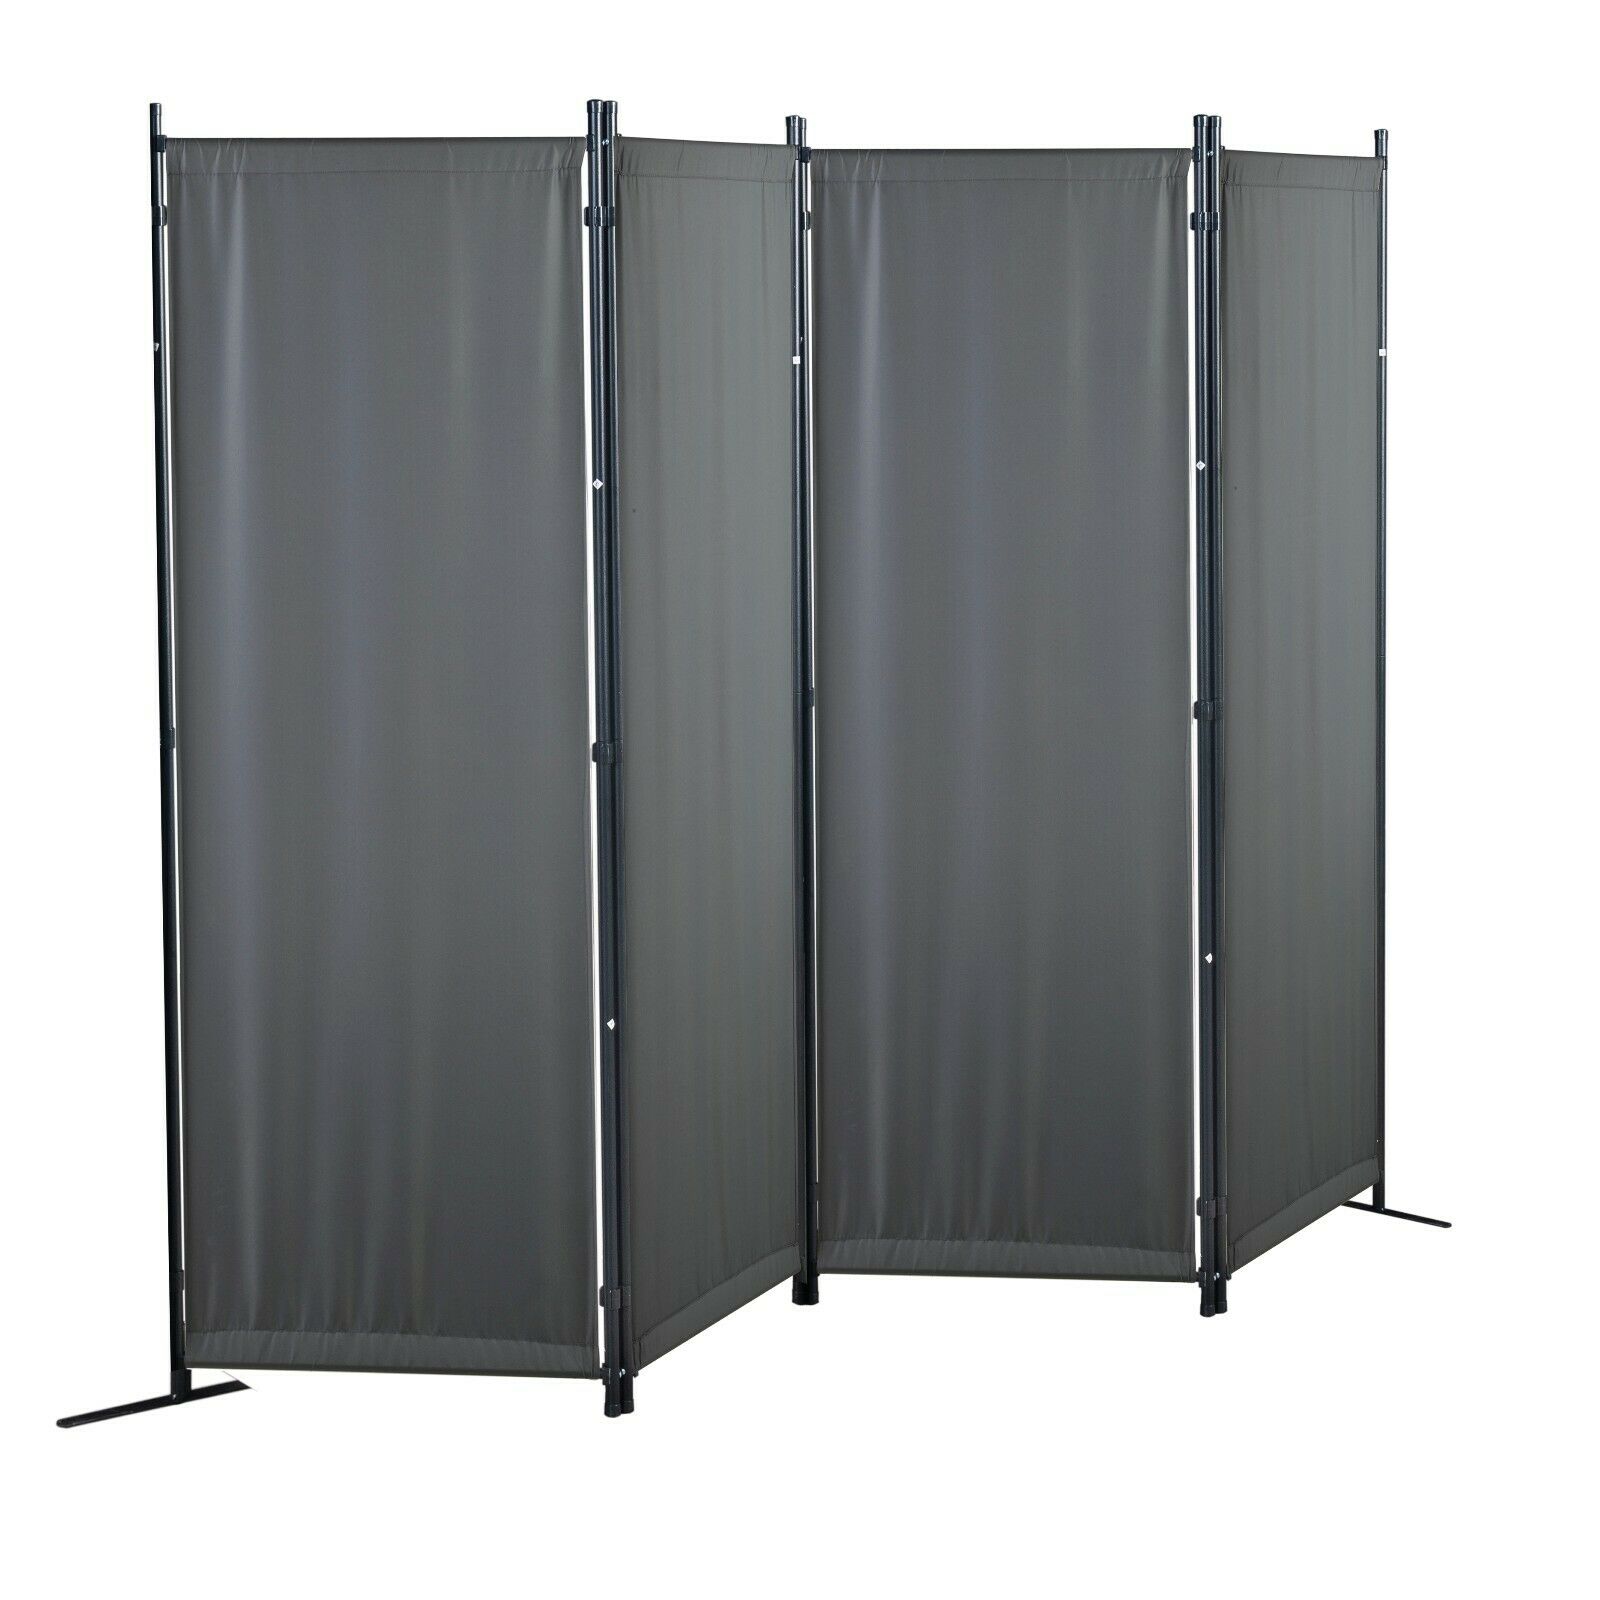 Folding Room Dividers 4 Panels Privacy Screens Home Office School Decor Dividers